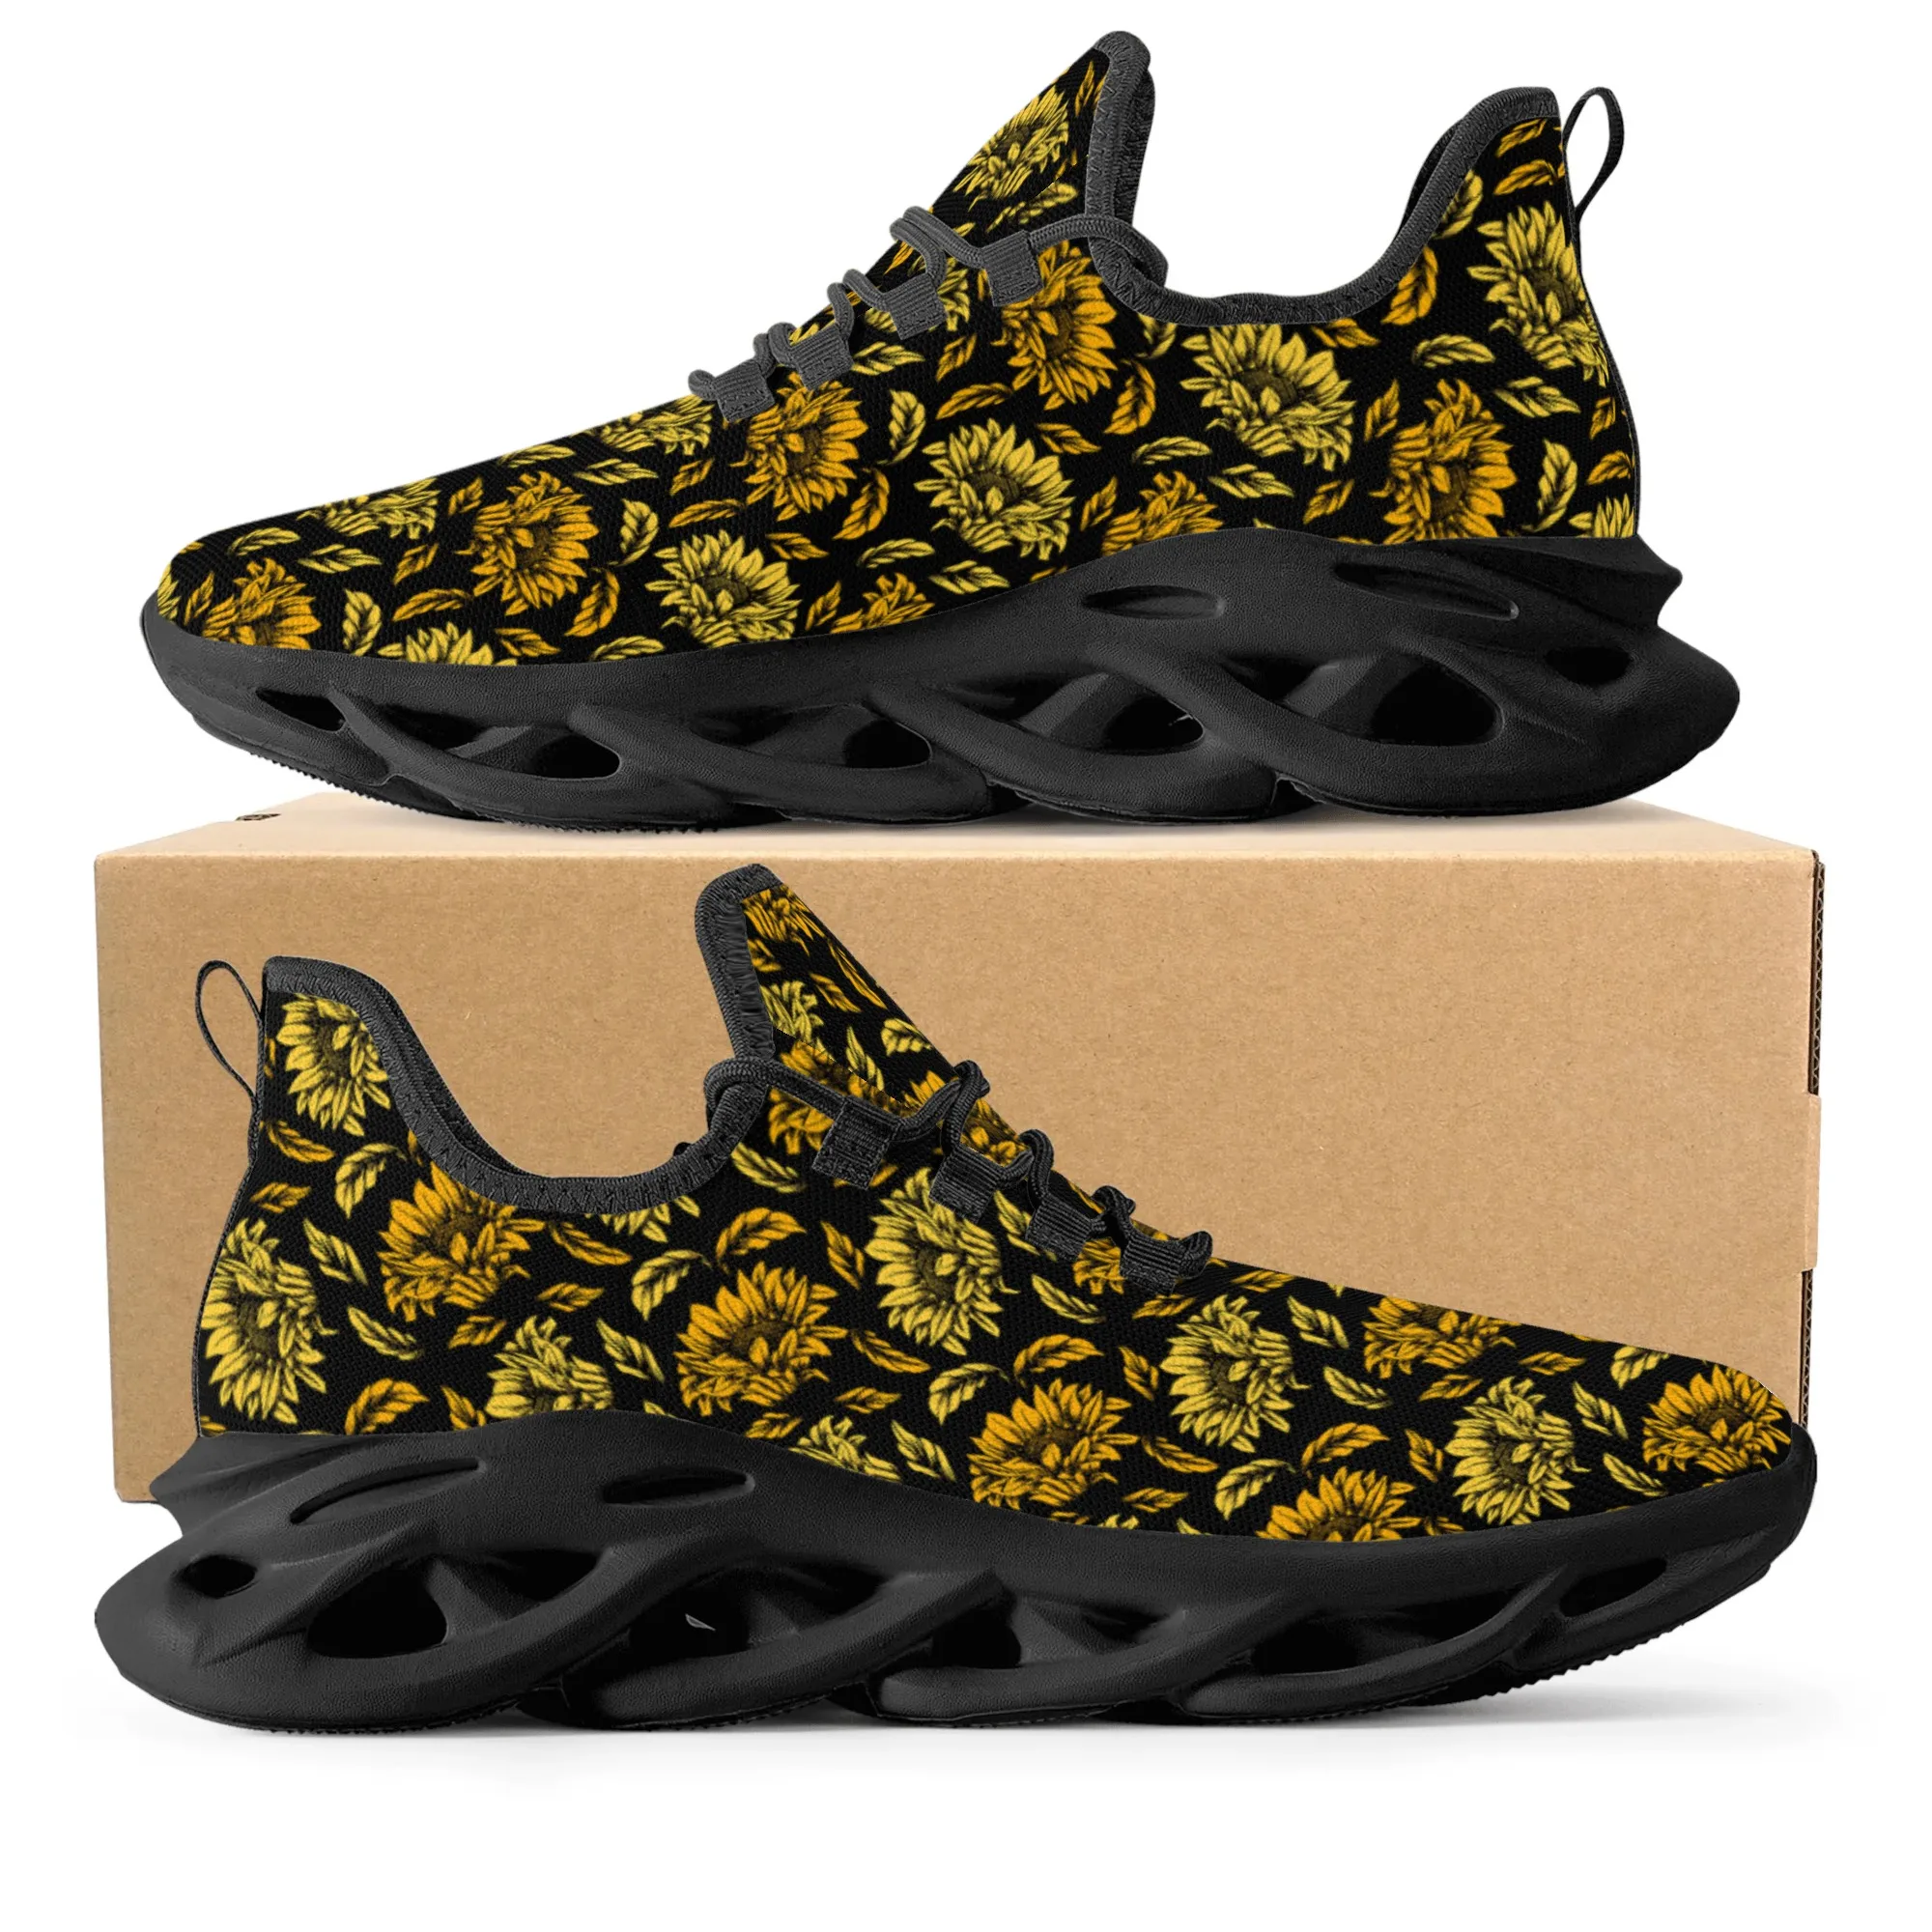 Sunflowers Print Design Fashion Funny Sneakers Men Women Teenager Breathable Mesh Casual Running Shoes Lace-Up Basketball Shoe new shoes men jogging casual shoe breathable mesh sneakers fashion comfortable men shoes lace up fashion shoe